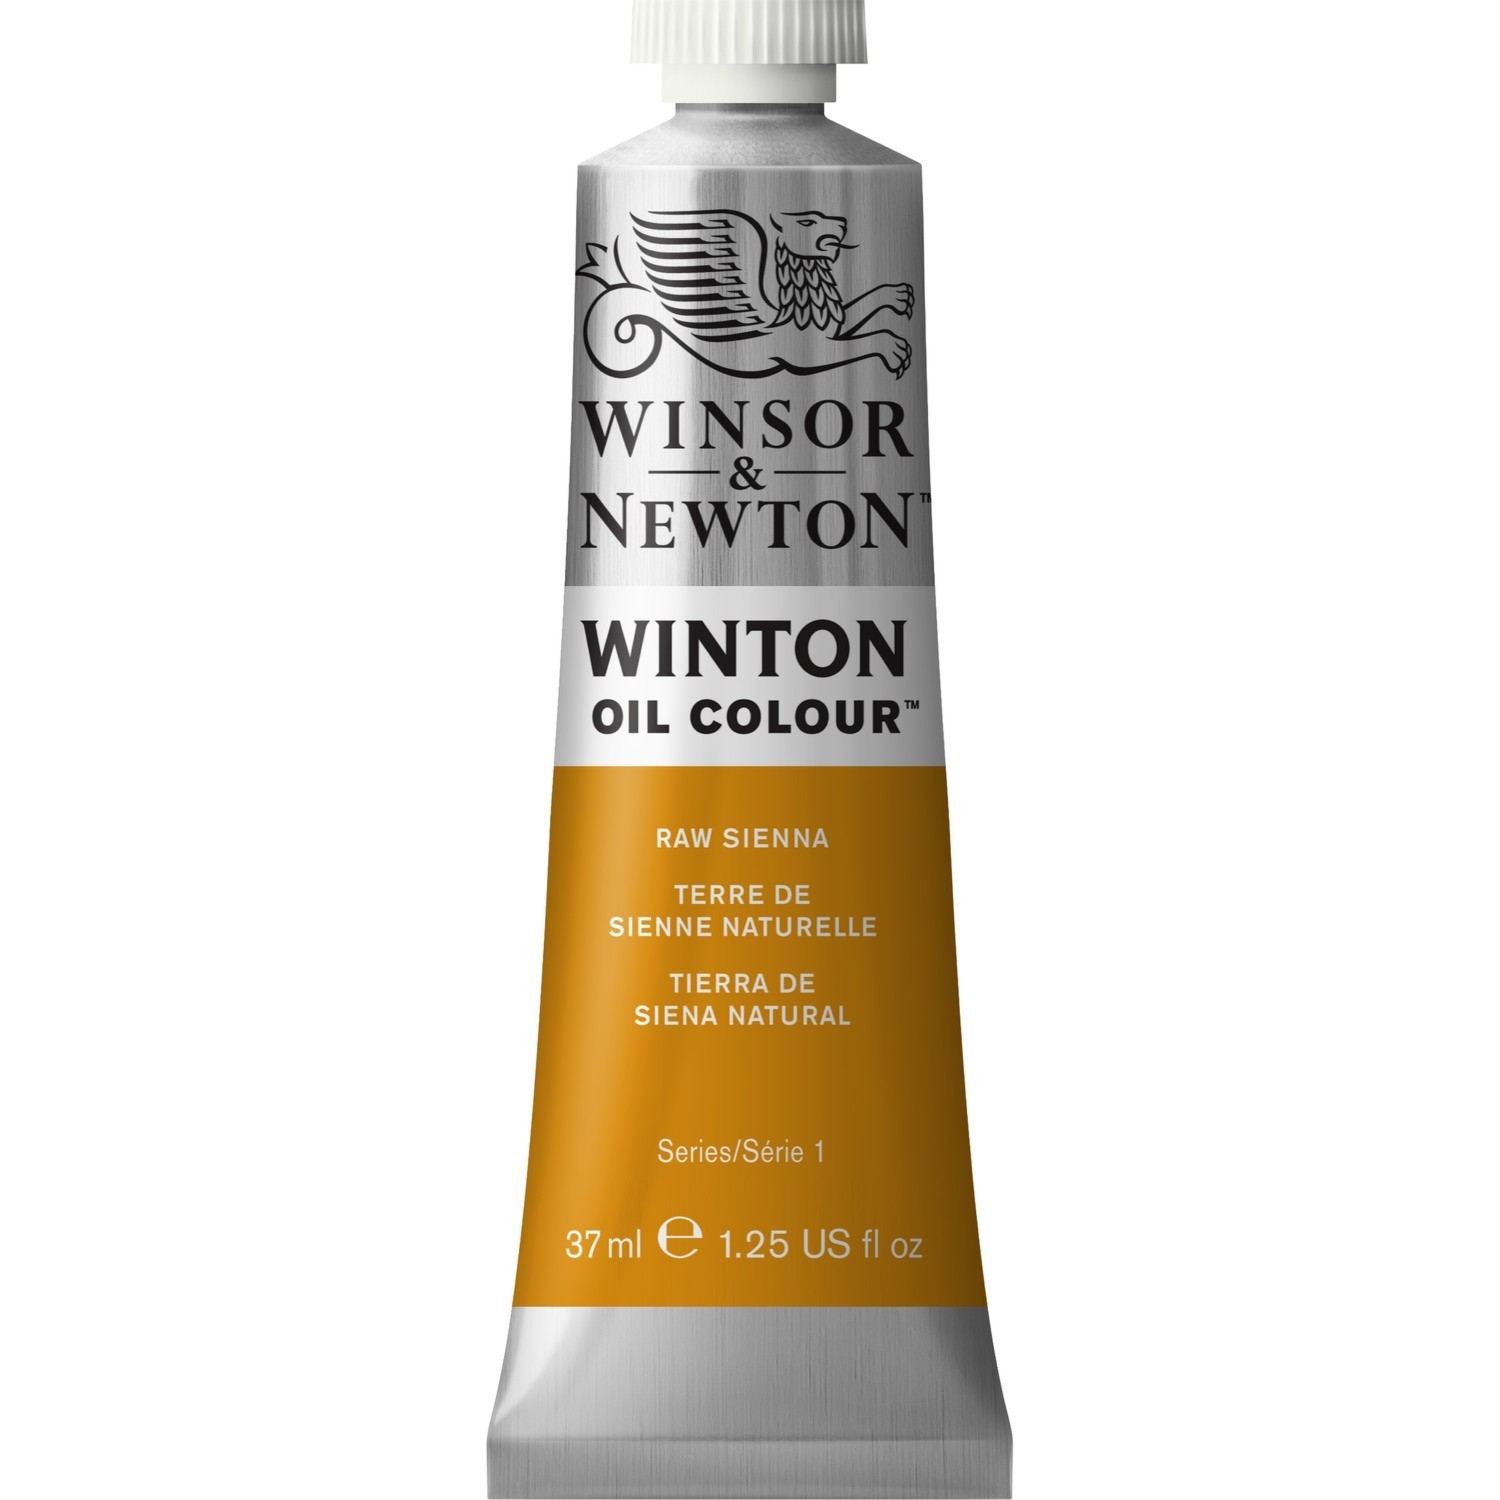 Winsor and Newton 37ml Winton Oil Colours - Raw Sienna Image 1